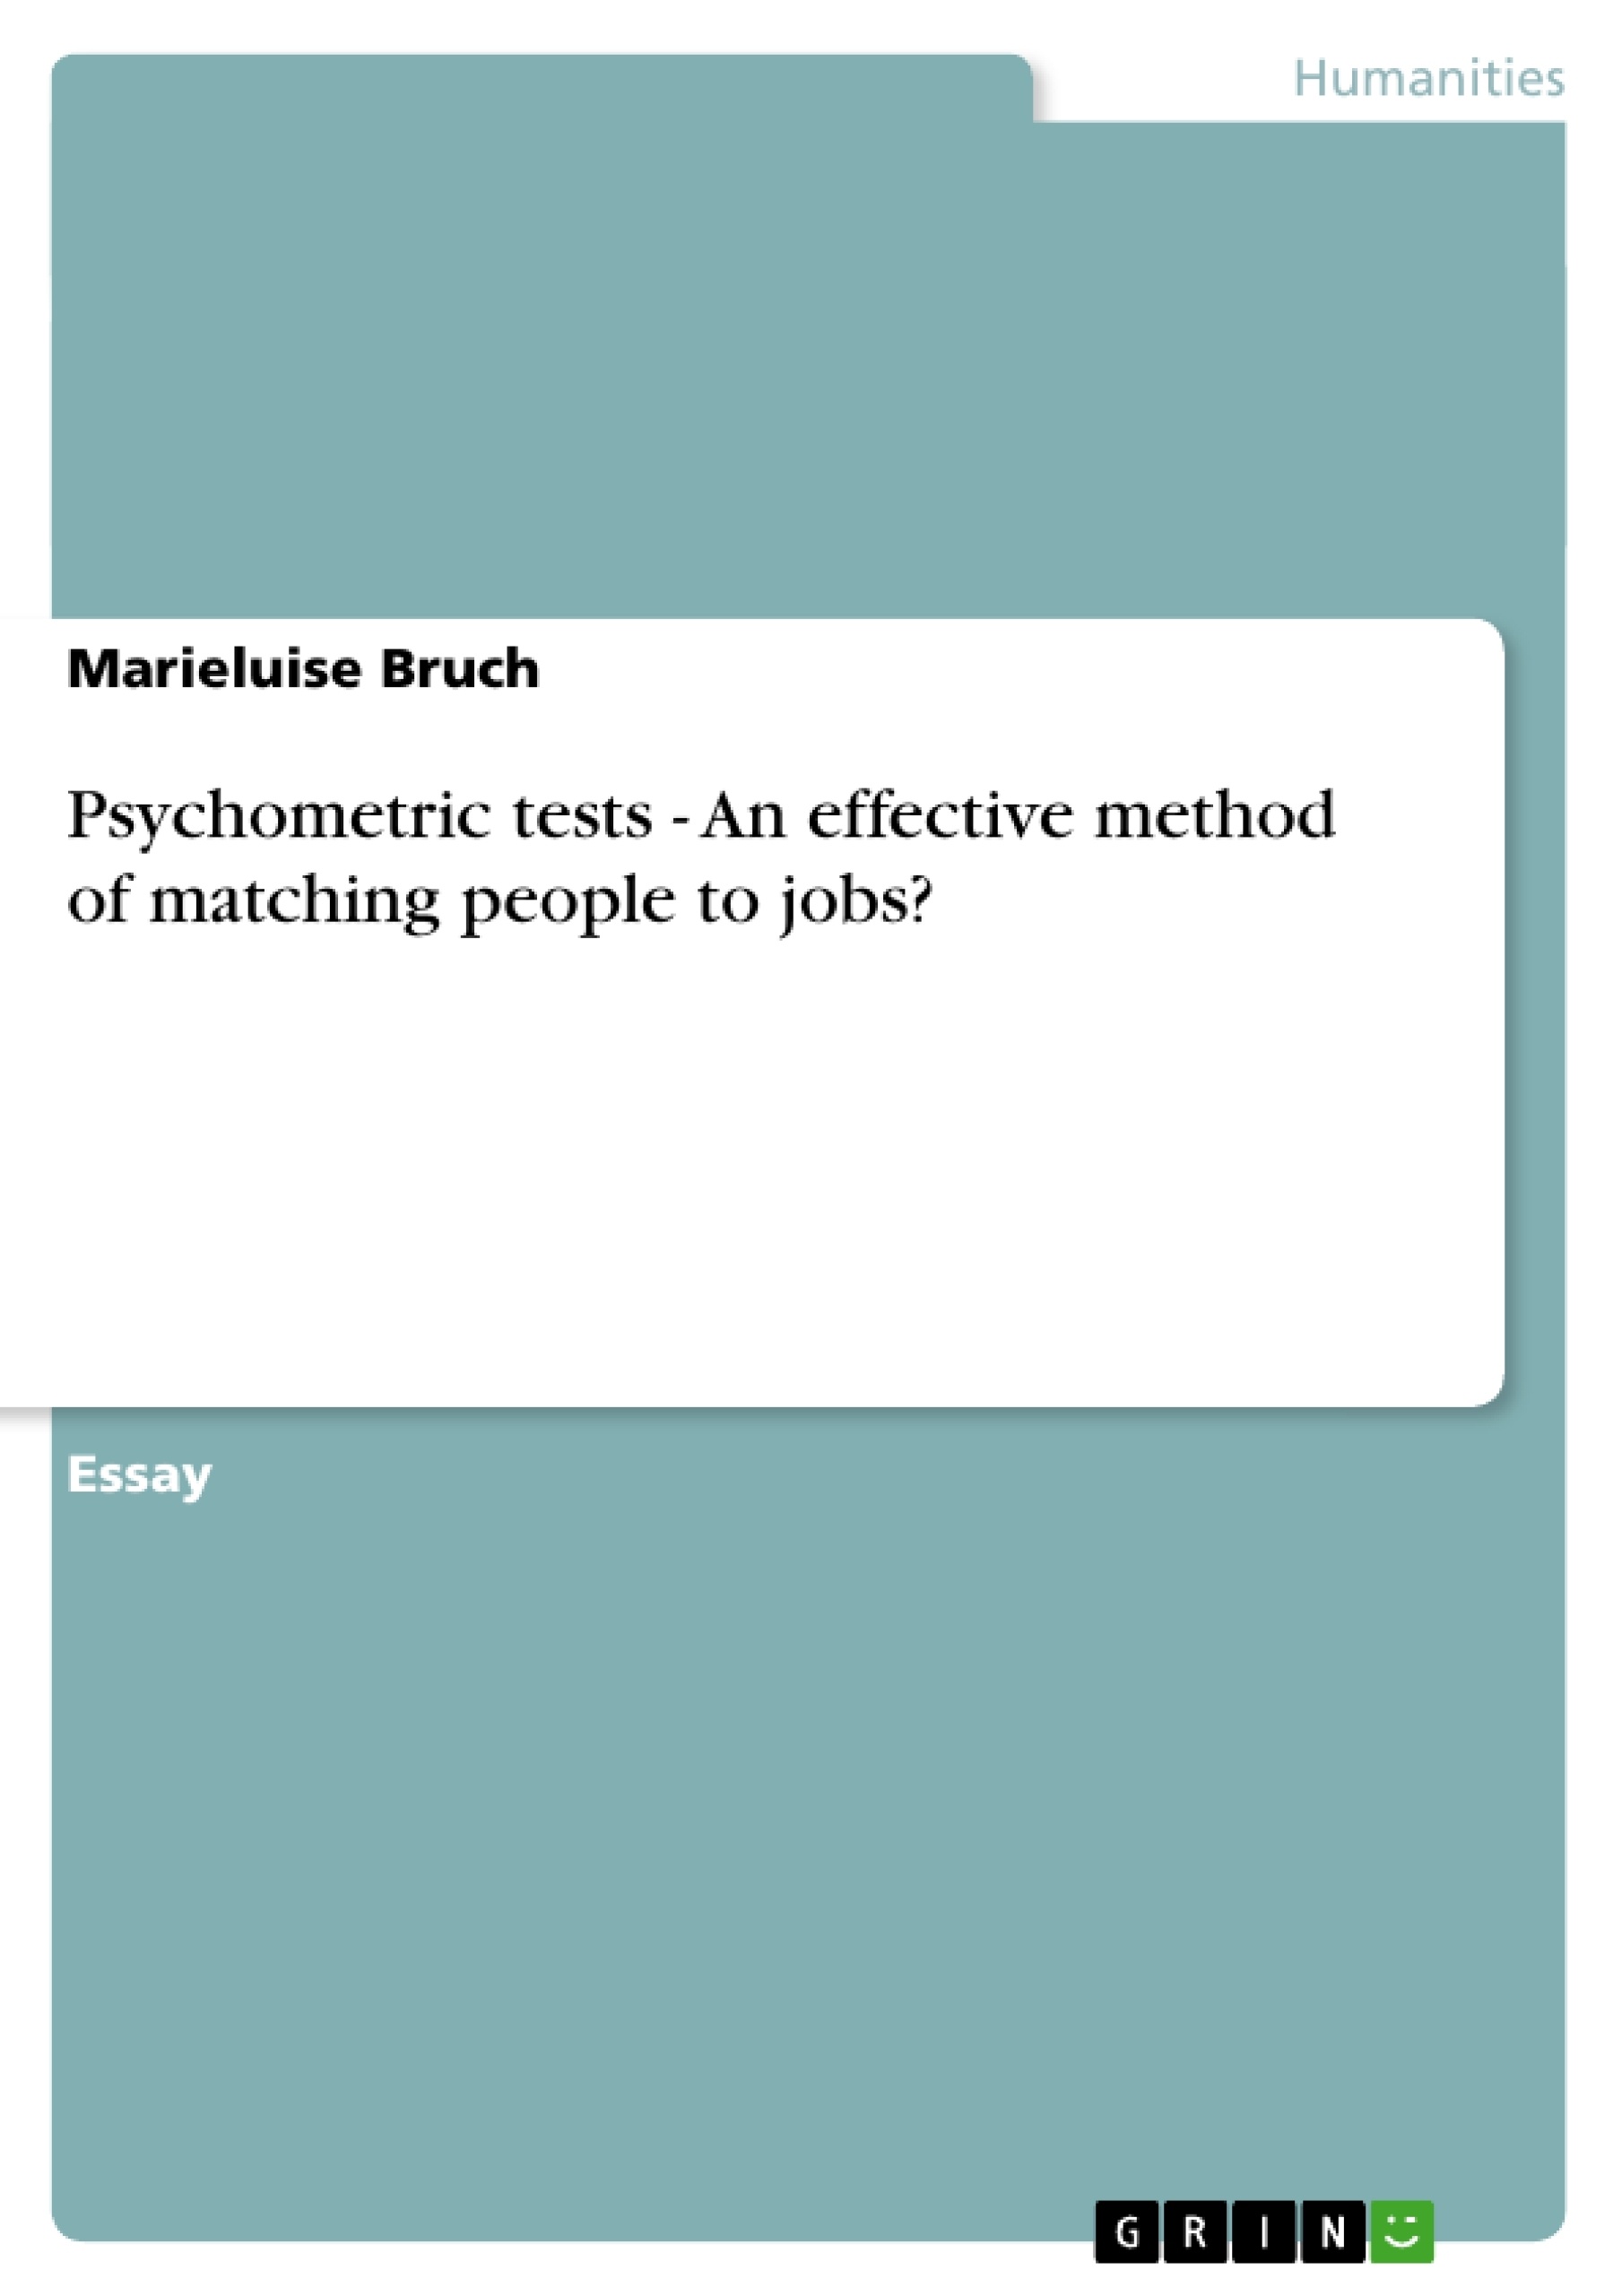 Título: Psychometric tests - An effective method of matching people to jobs?